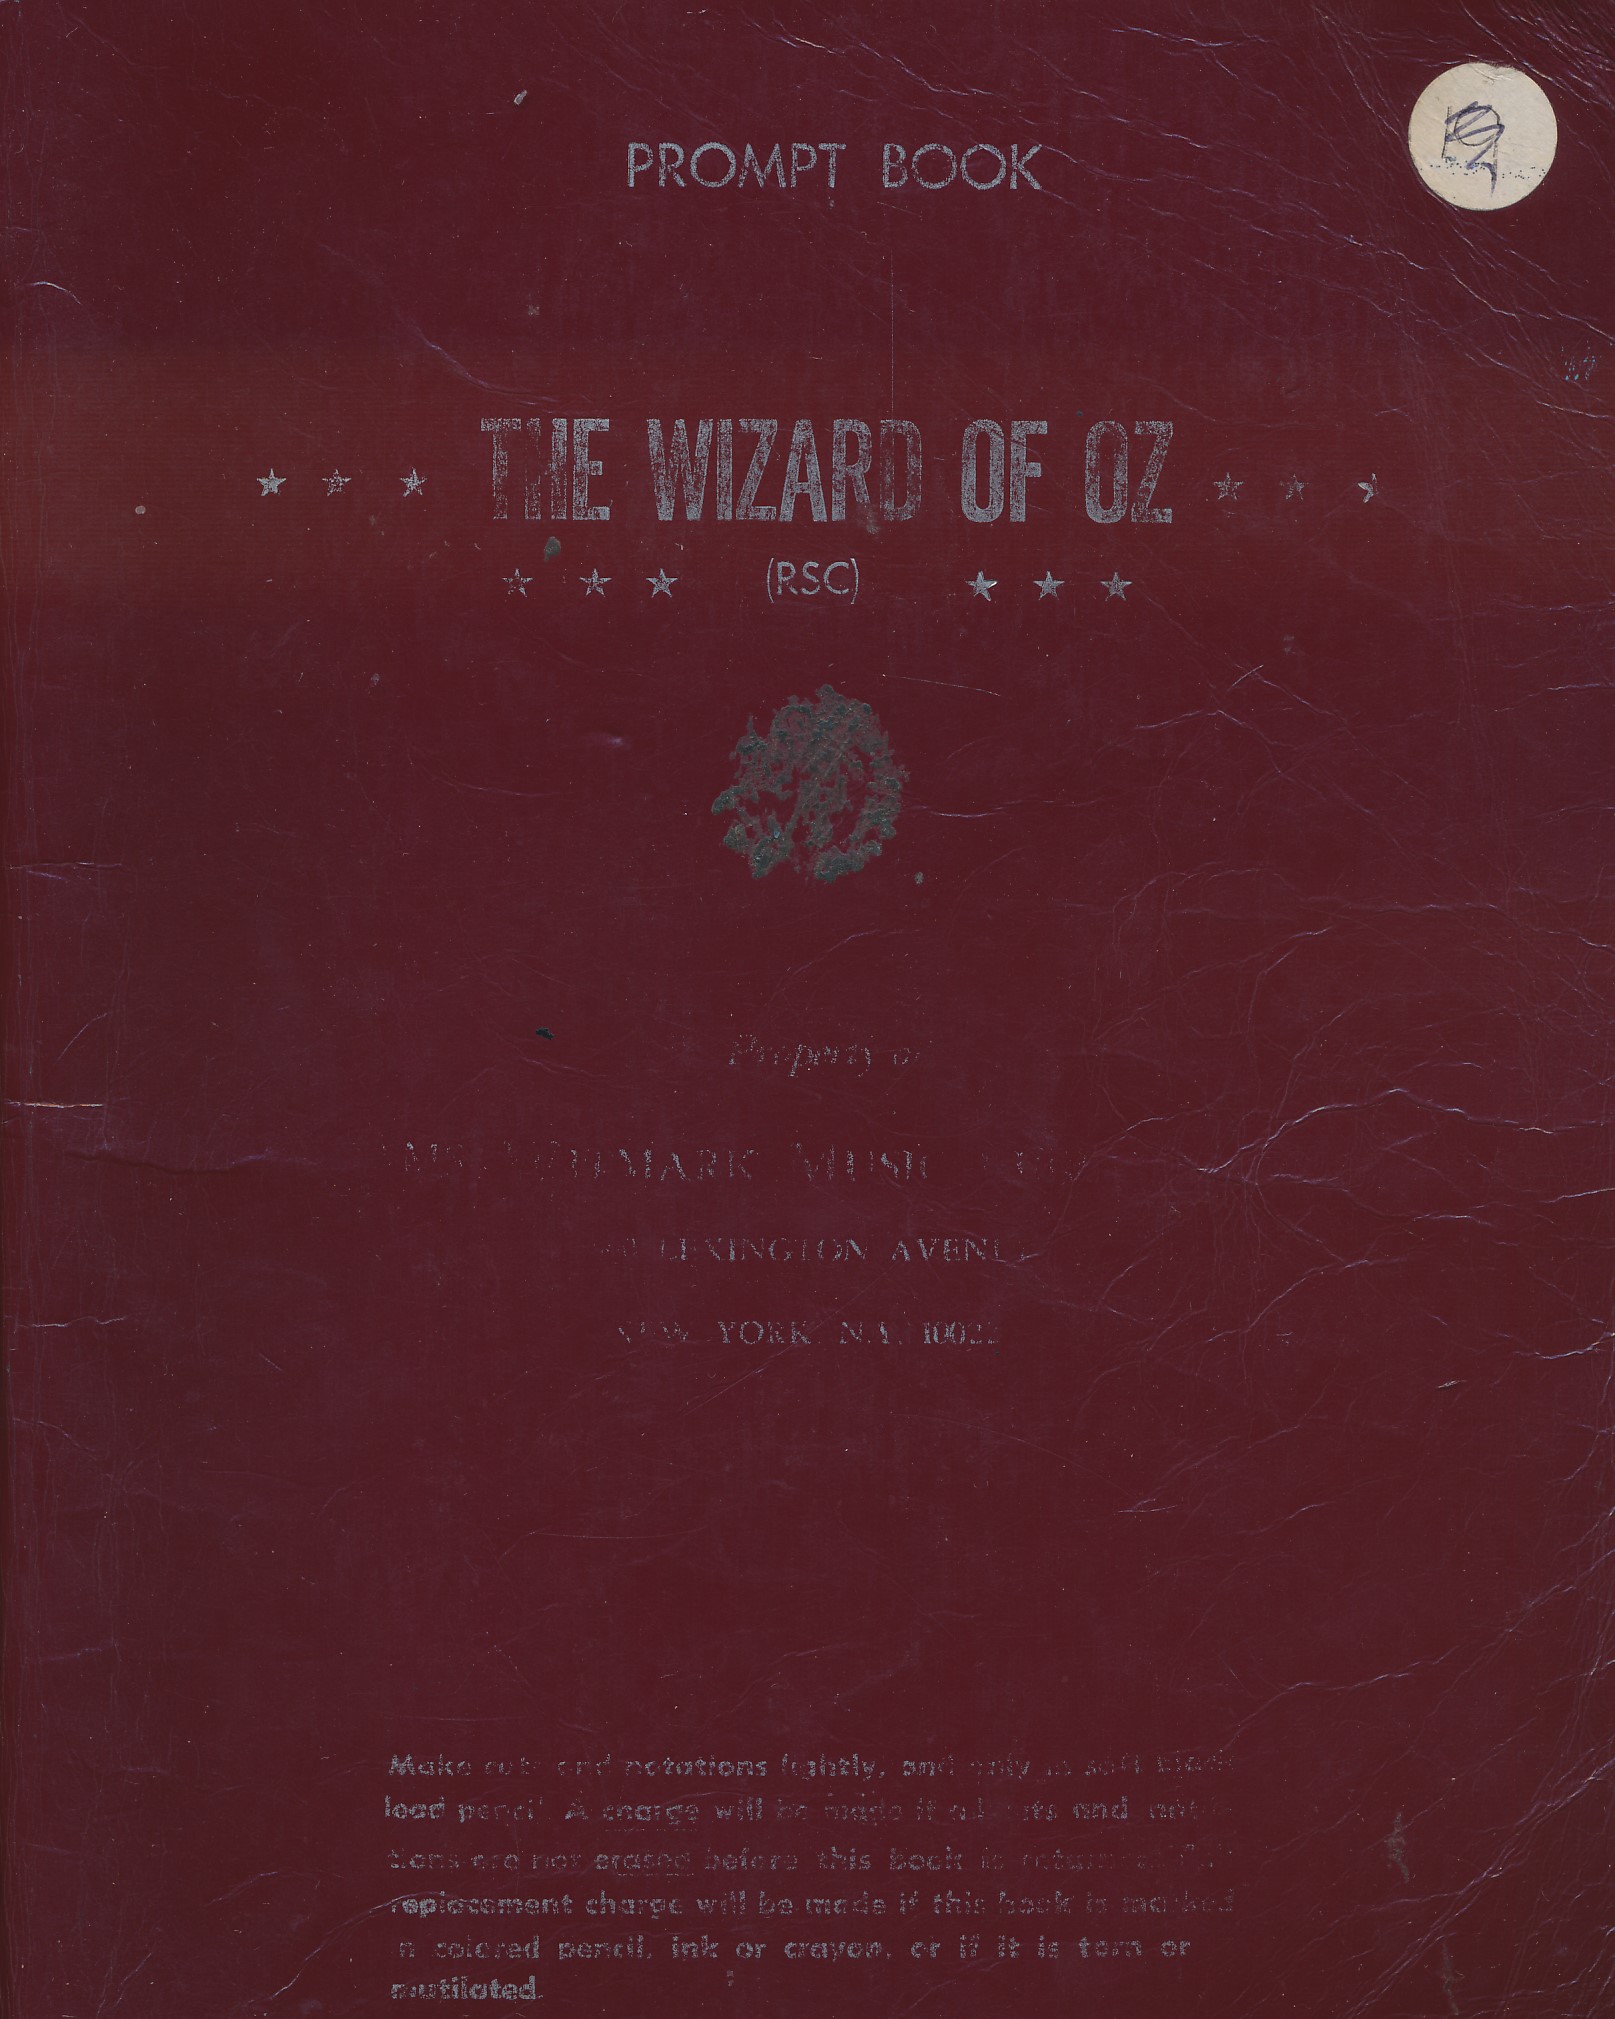 The Wizard of Oz. Presented by the Royal Shakespeare Company.